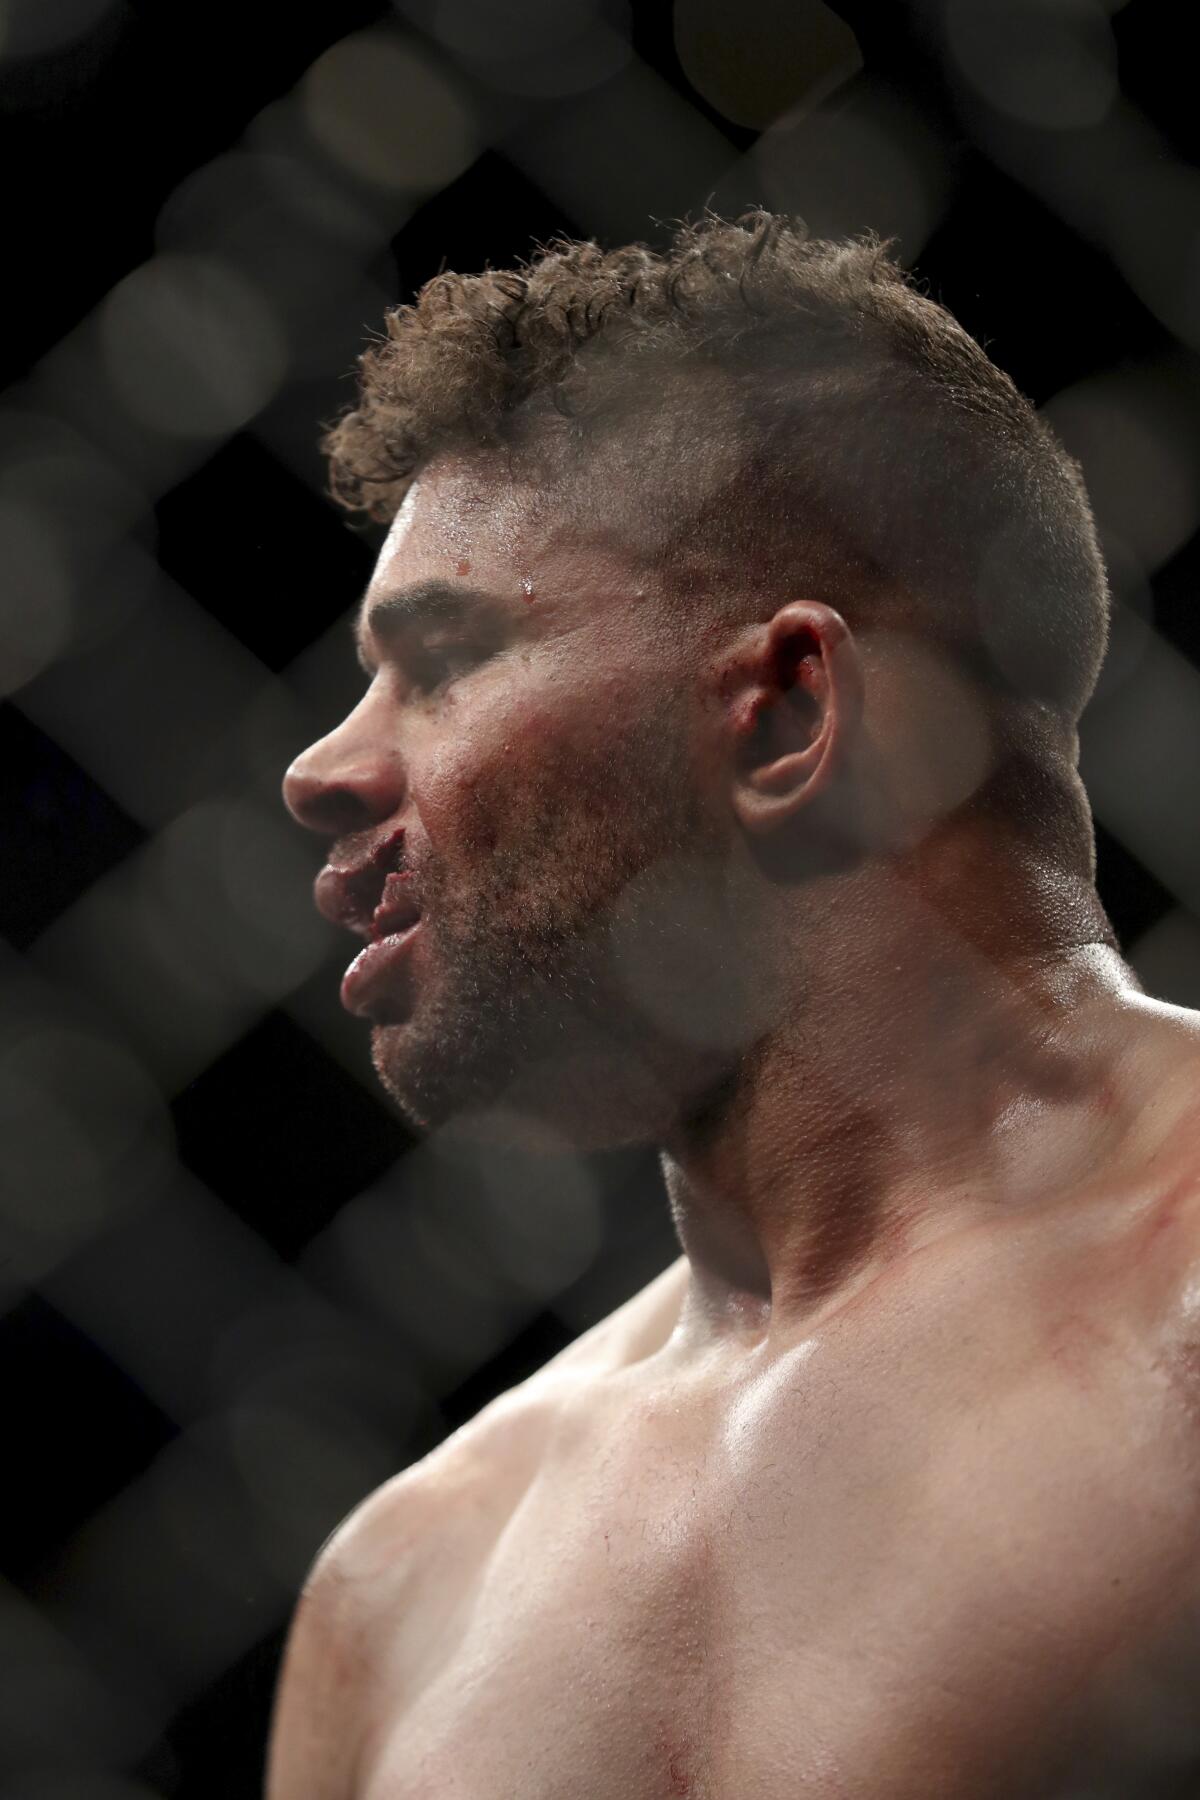 Alistair Overeem is seen with a cut lip after losing to Jairzinho Rozenstruik.